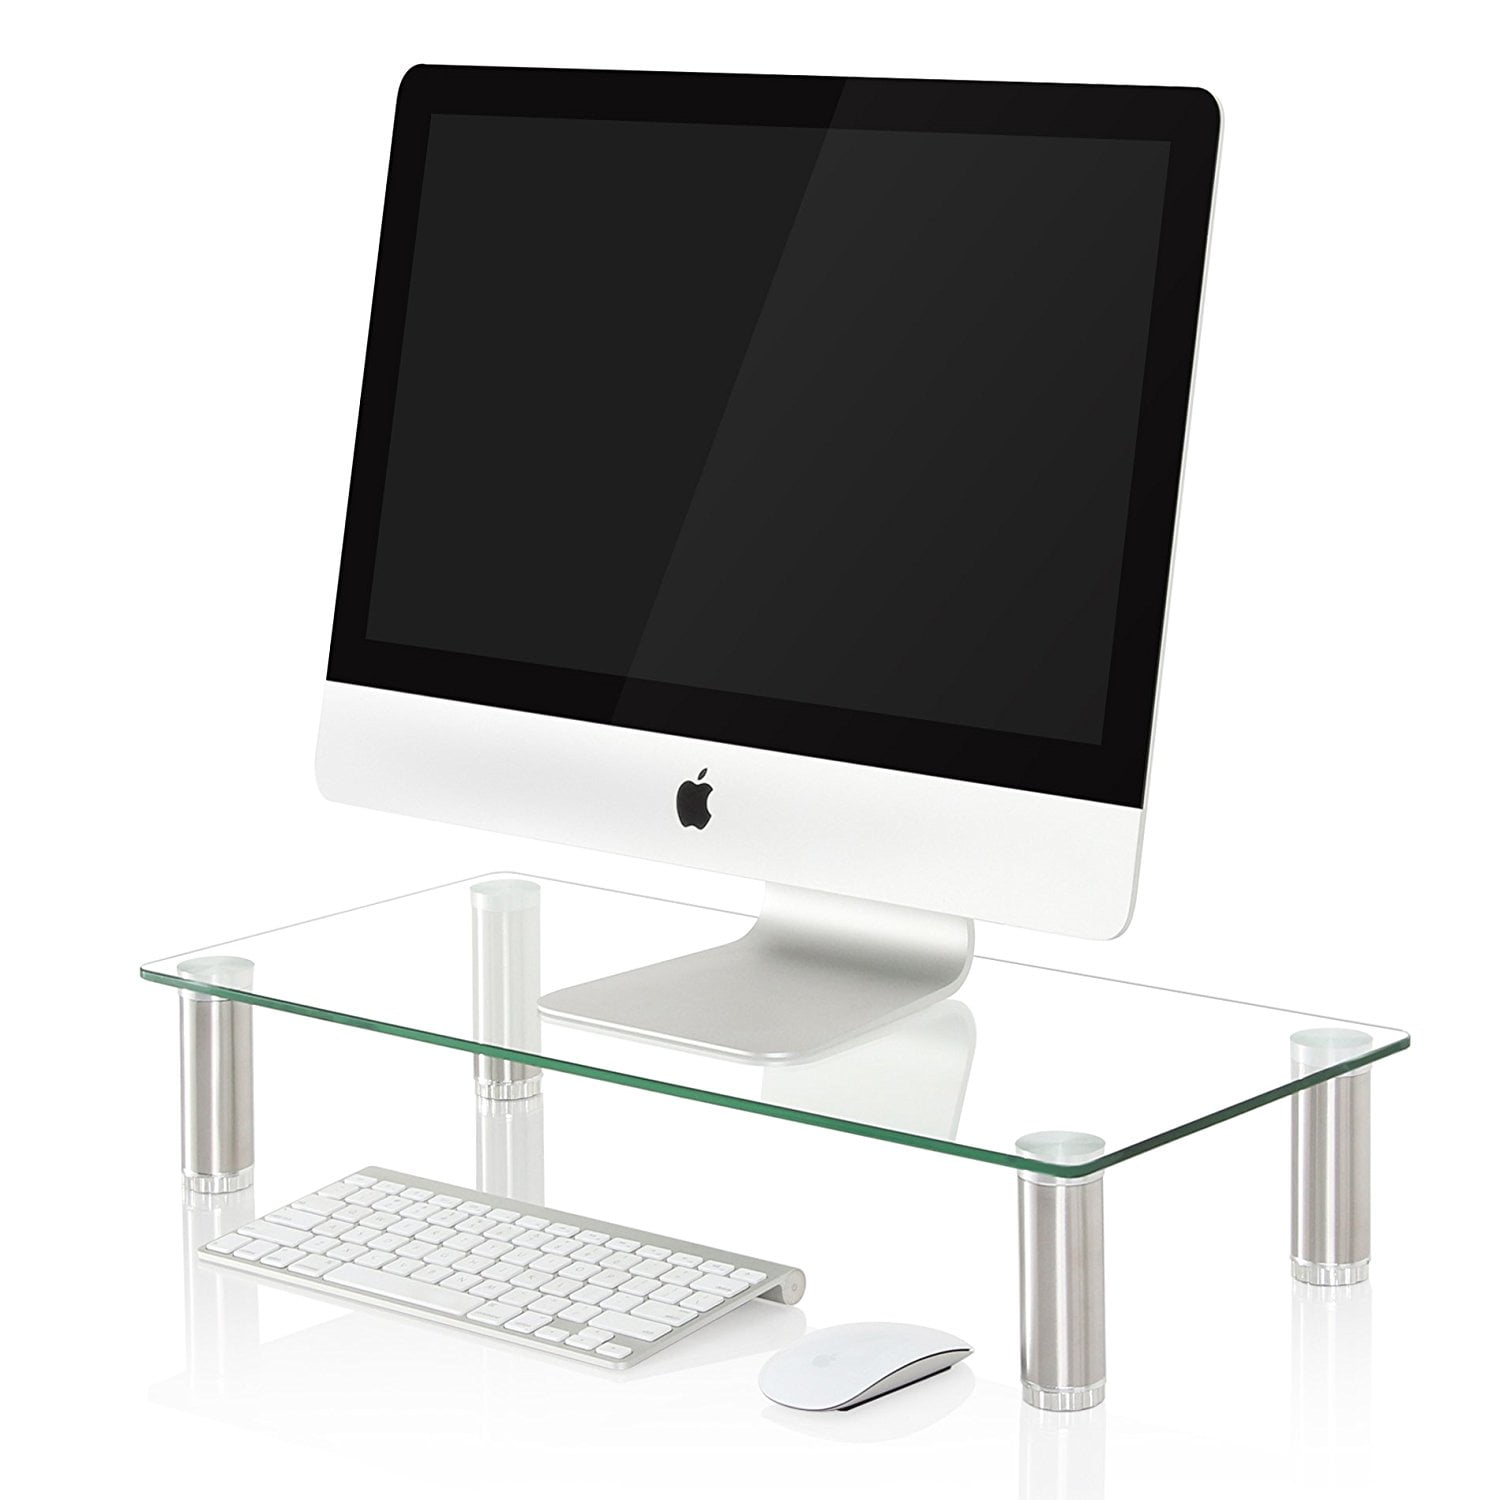 Fitueyes Clear Computer Monitor Riser 4.7'' High 23.6'' Save Space Desktop Stand 